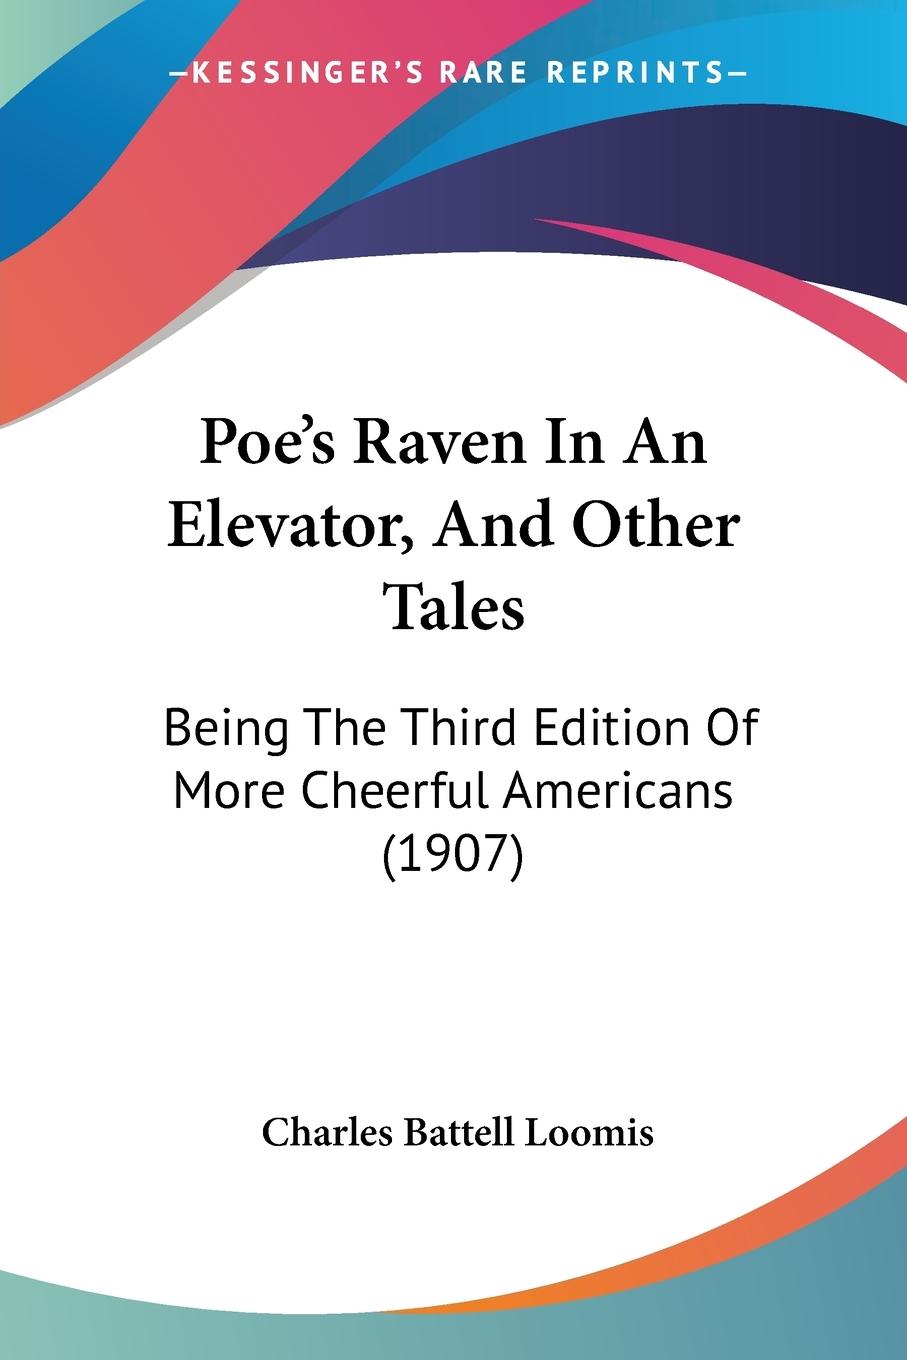 Poe s Raven In An Elevator, And Other Tales - Loomis, Charles Battell